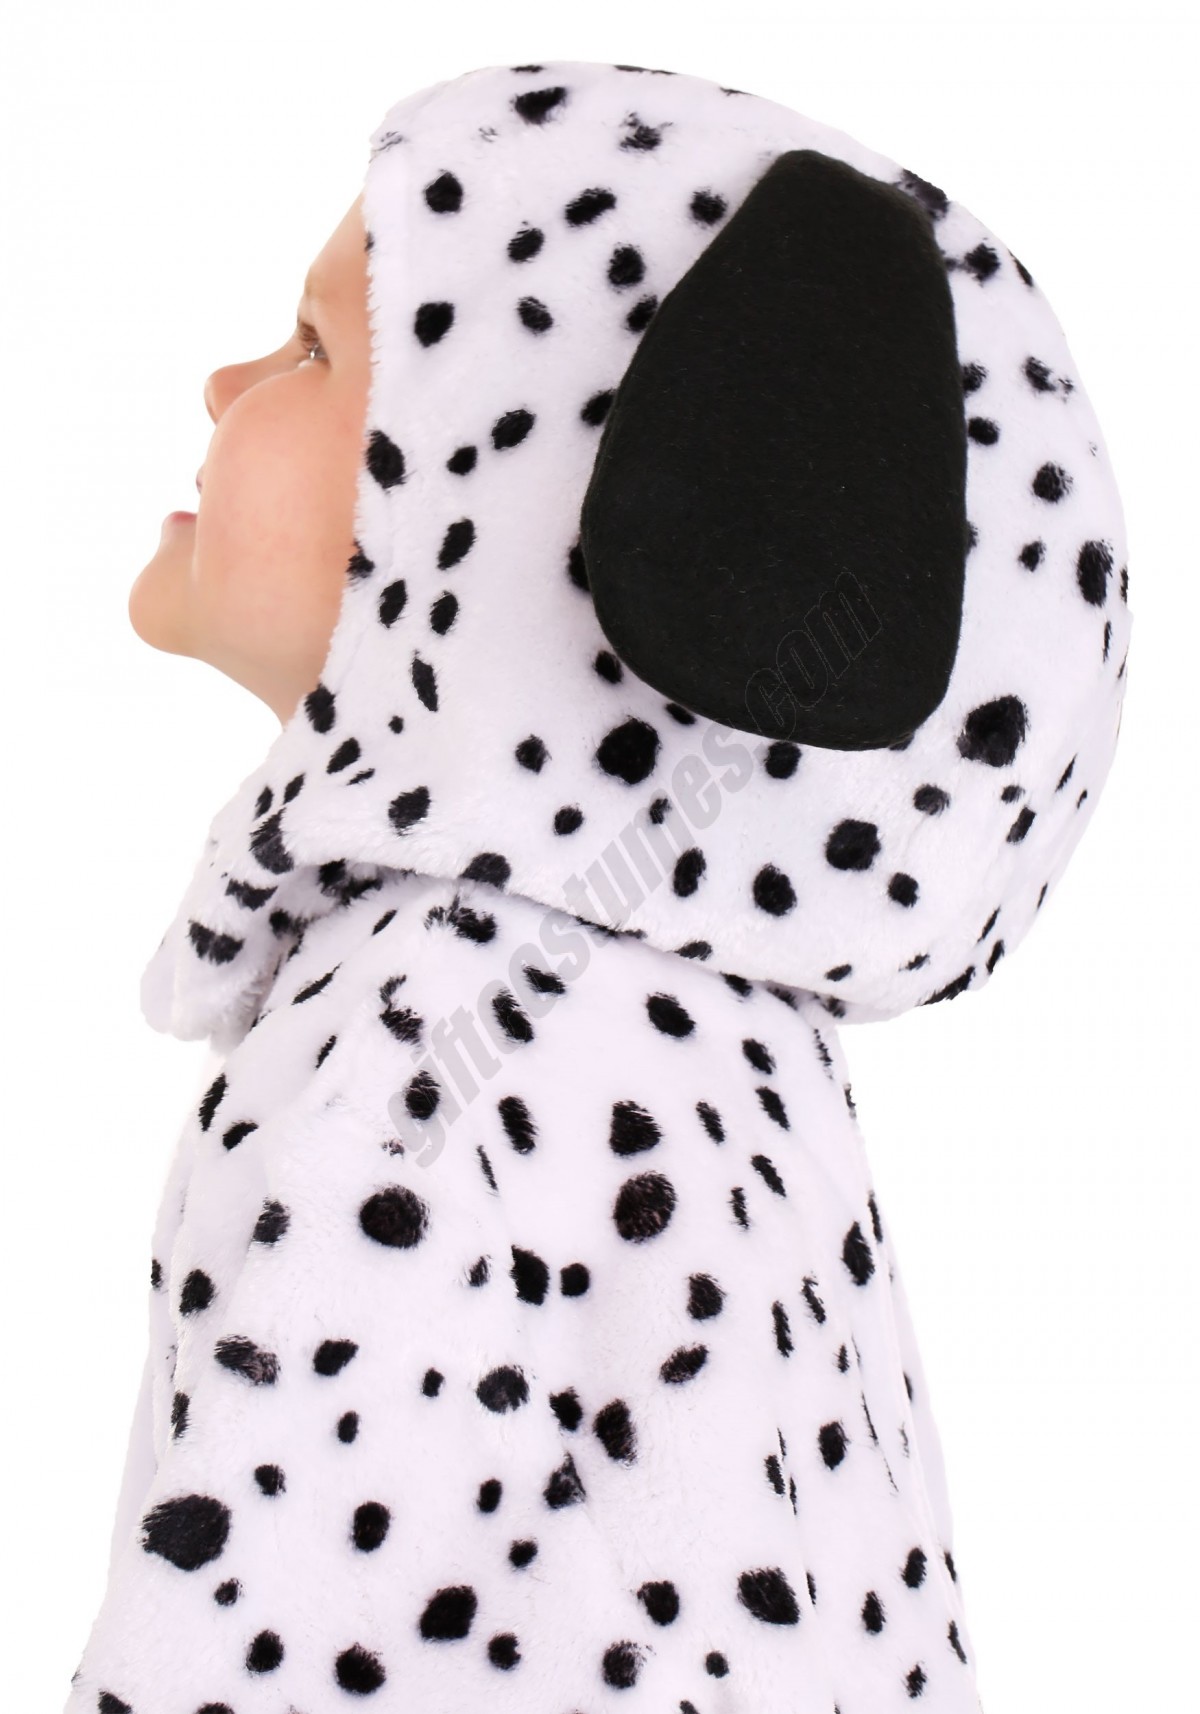 Toddlers Dalmatian Costume Promotions - -3